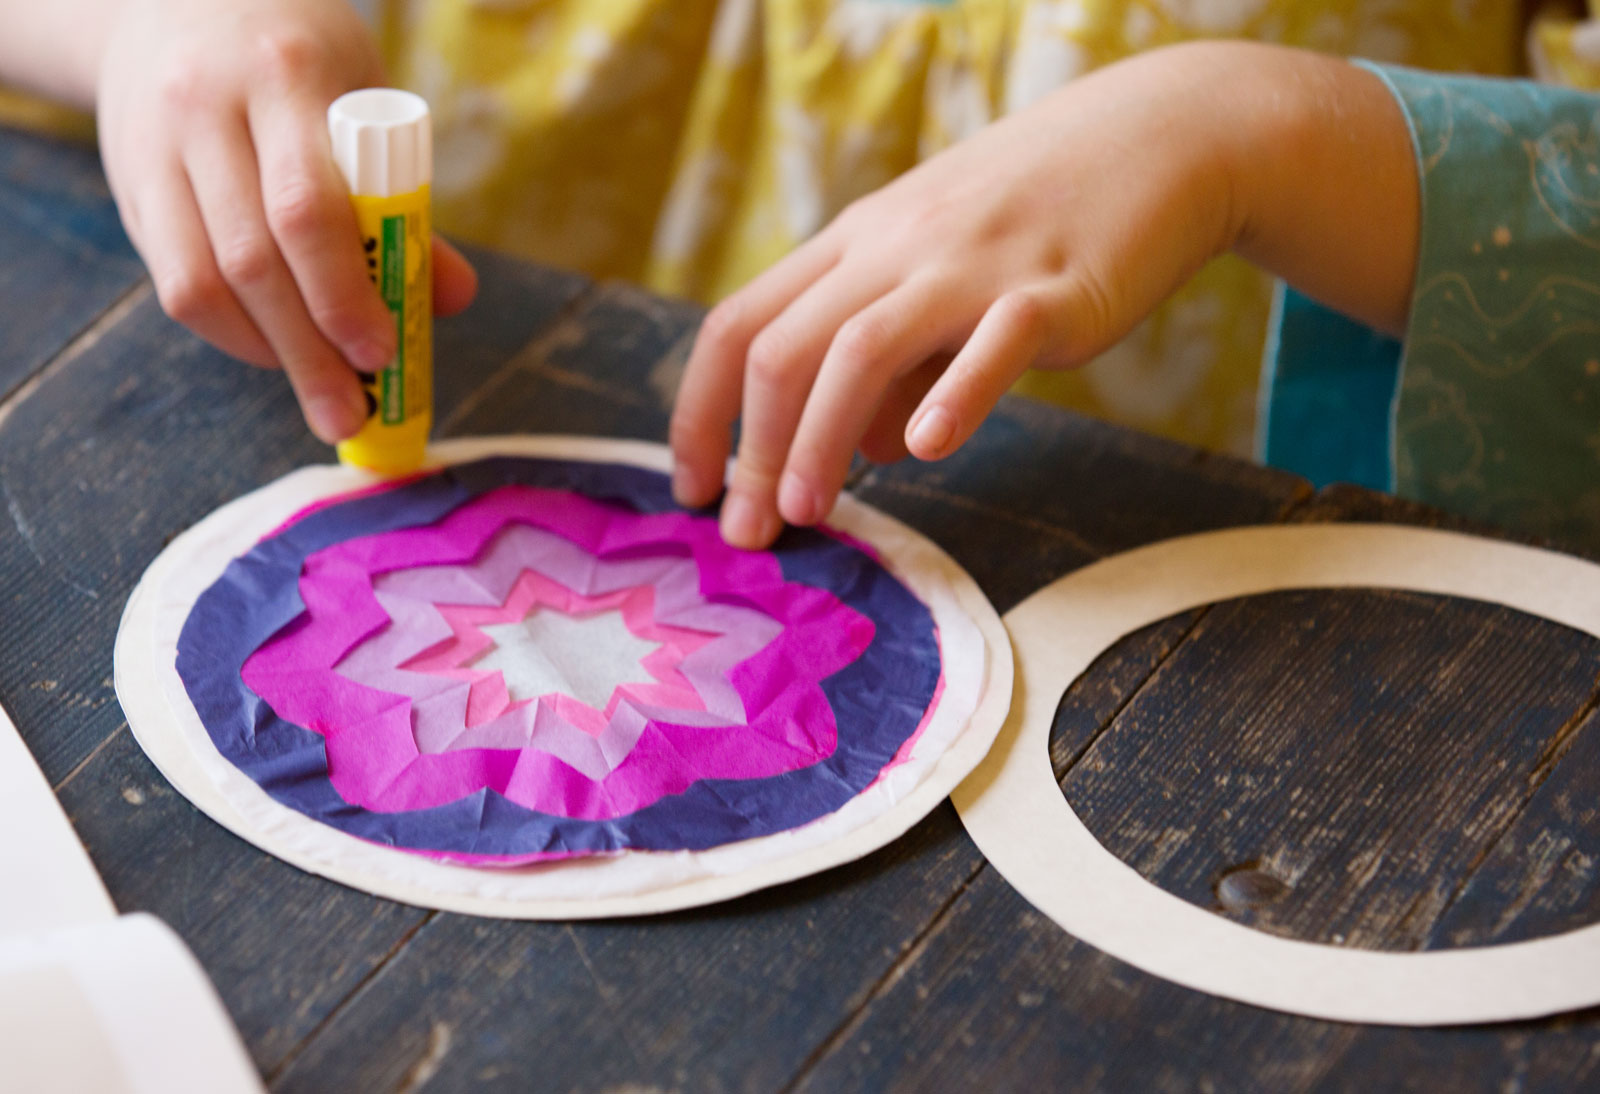 10 Beautiful Stained Glass Art Projects For Kids - Fabulessly Frugal